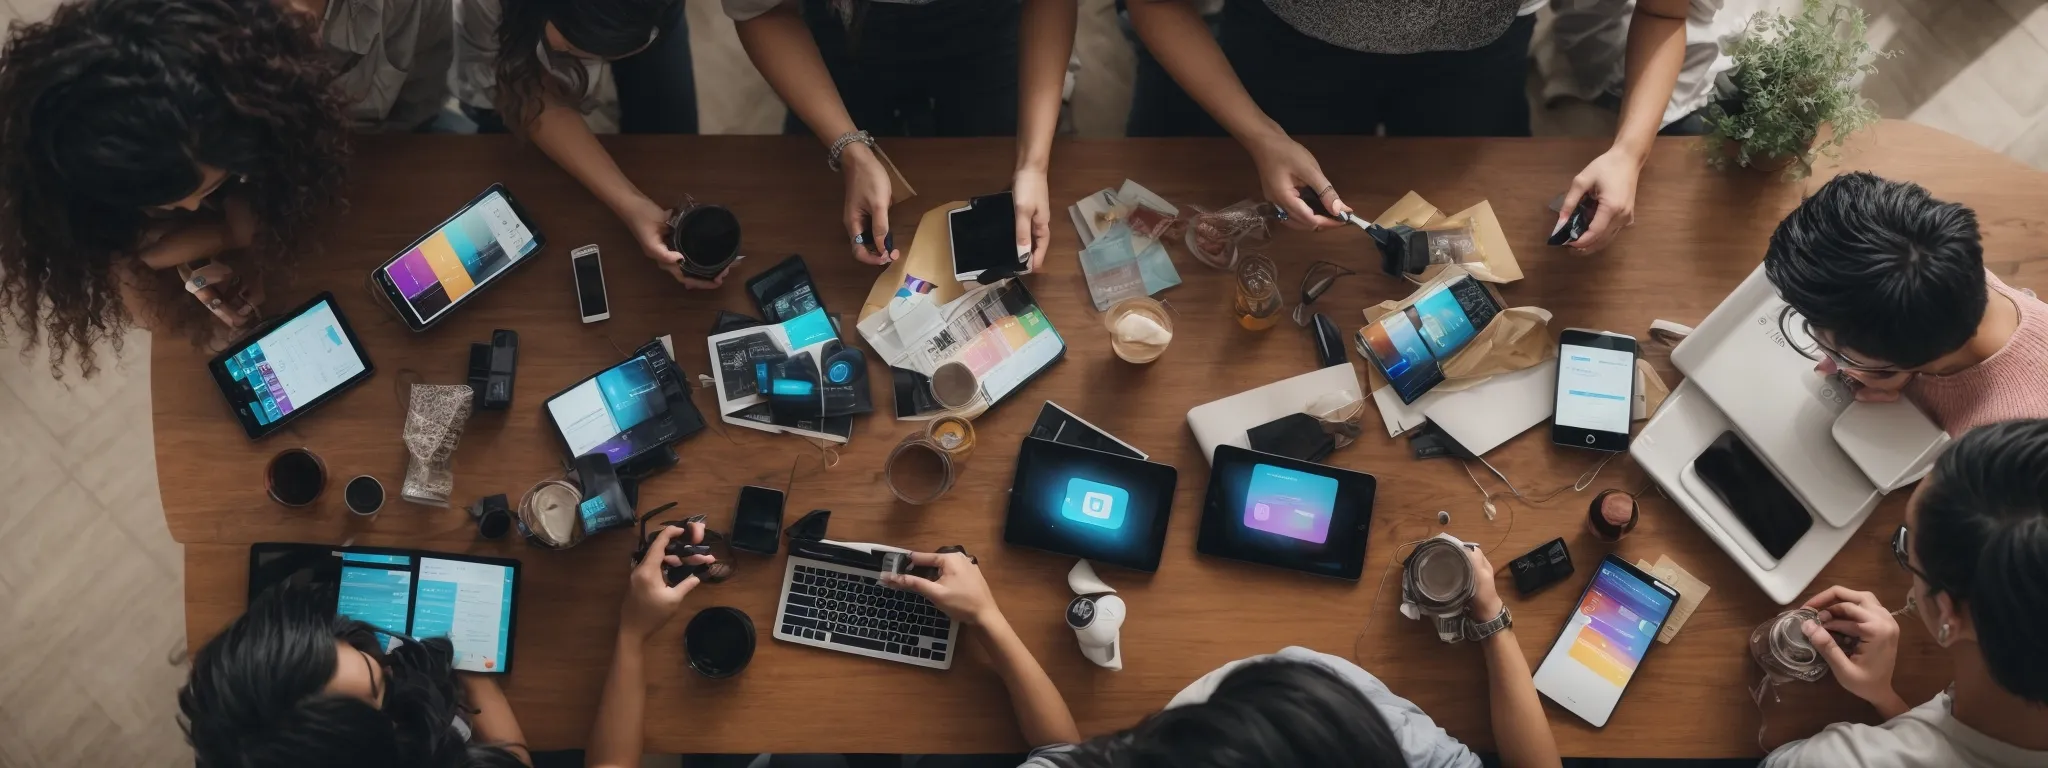 a digital marketing team strategizing around a table laden with various smart devices displaying colorful social media interfaces.